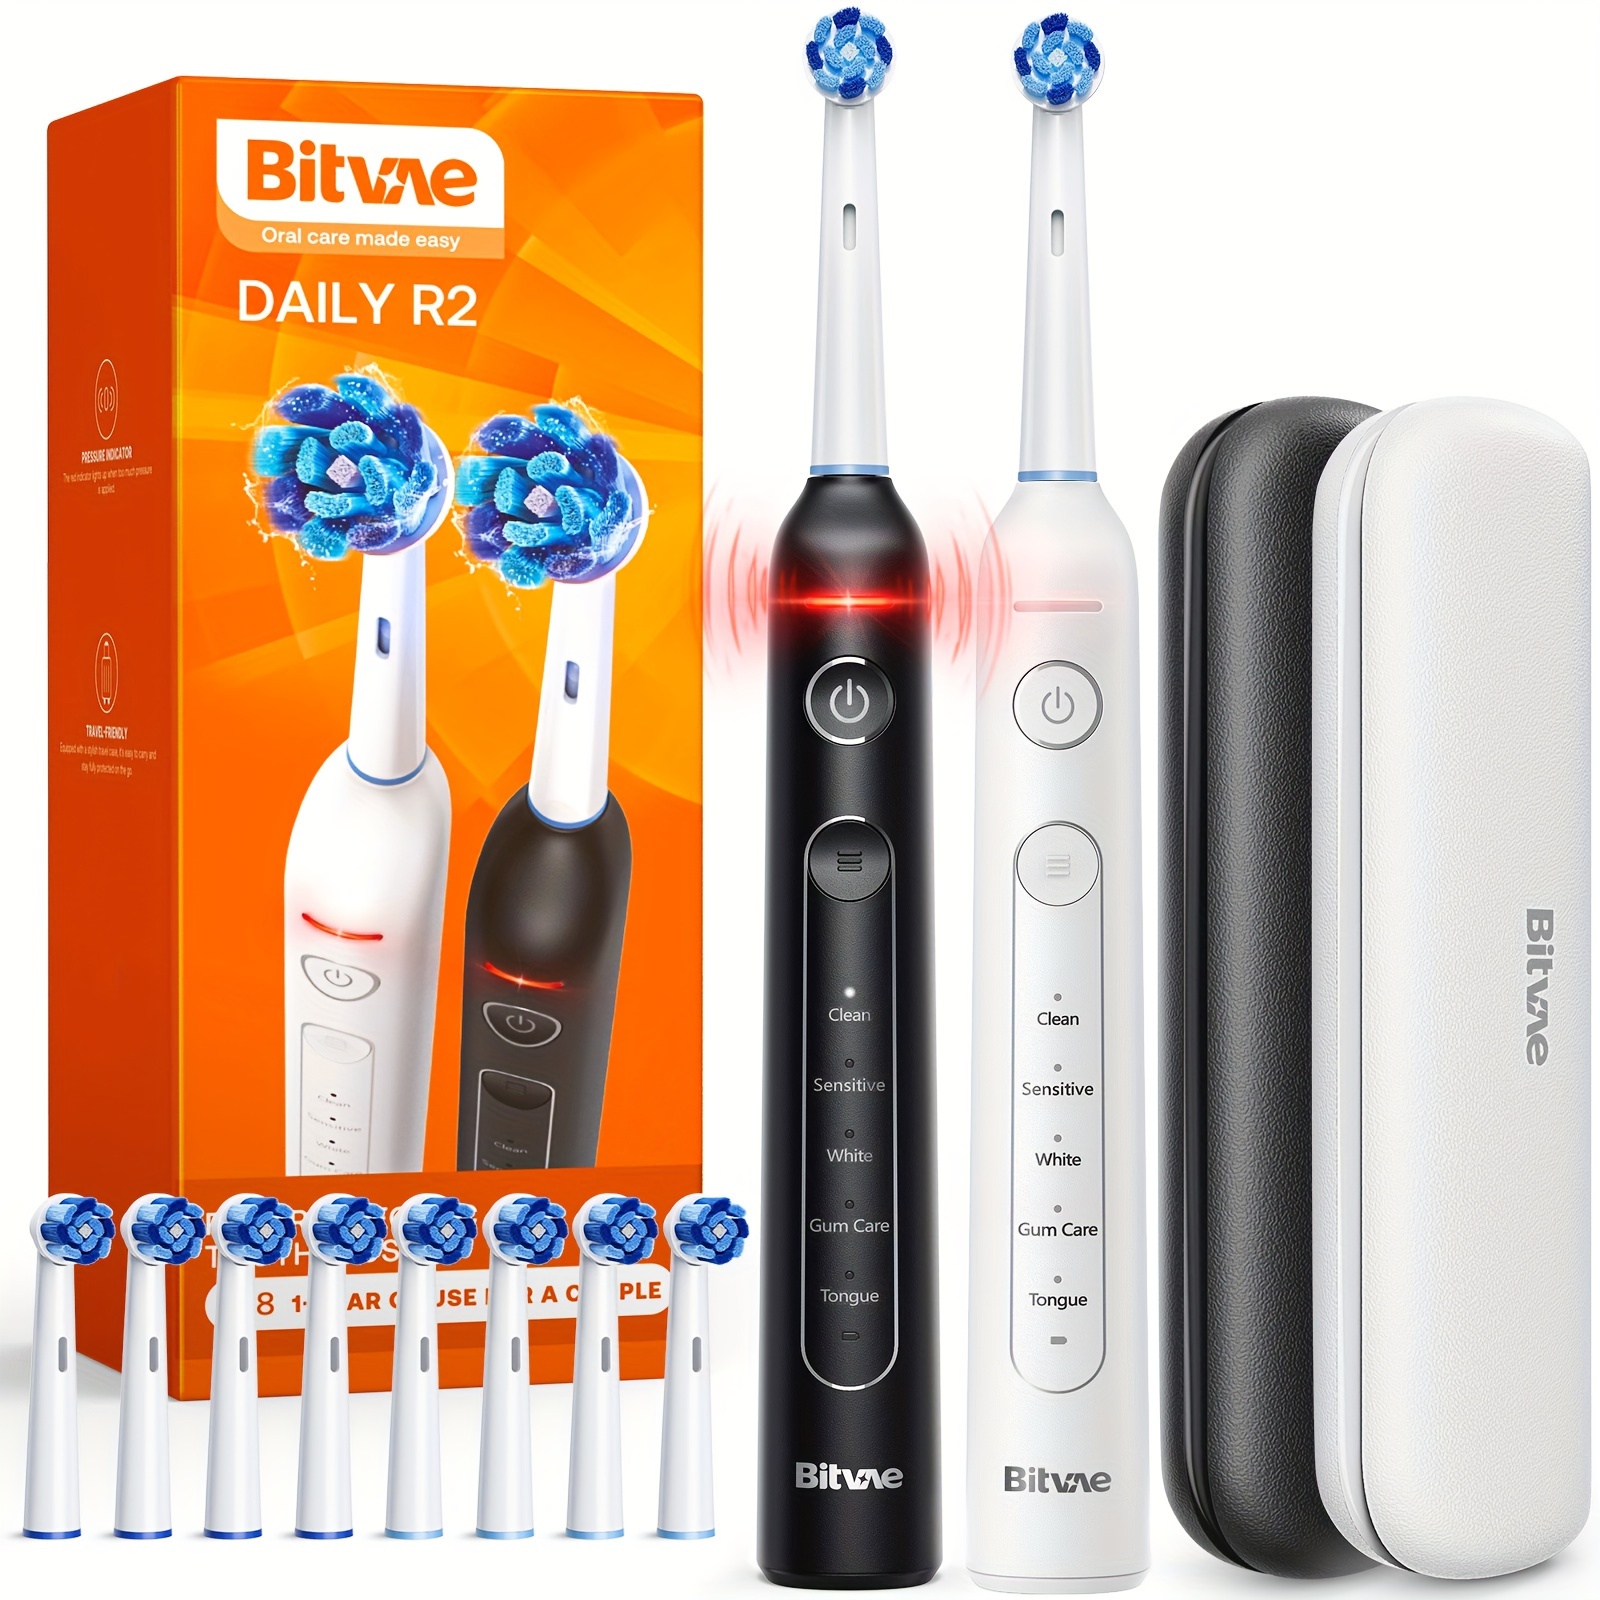 

Bitvae Rotating Electric Toothbrush 2 Packs For Adults With Pressure Sensor, Gifts For Men/women, 5 Modes Rechargeable Power Toothbrush With 8 Brush Heads, Black & White, R2